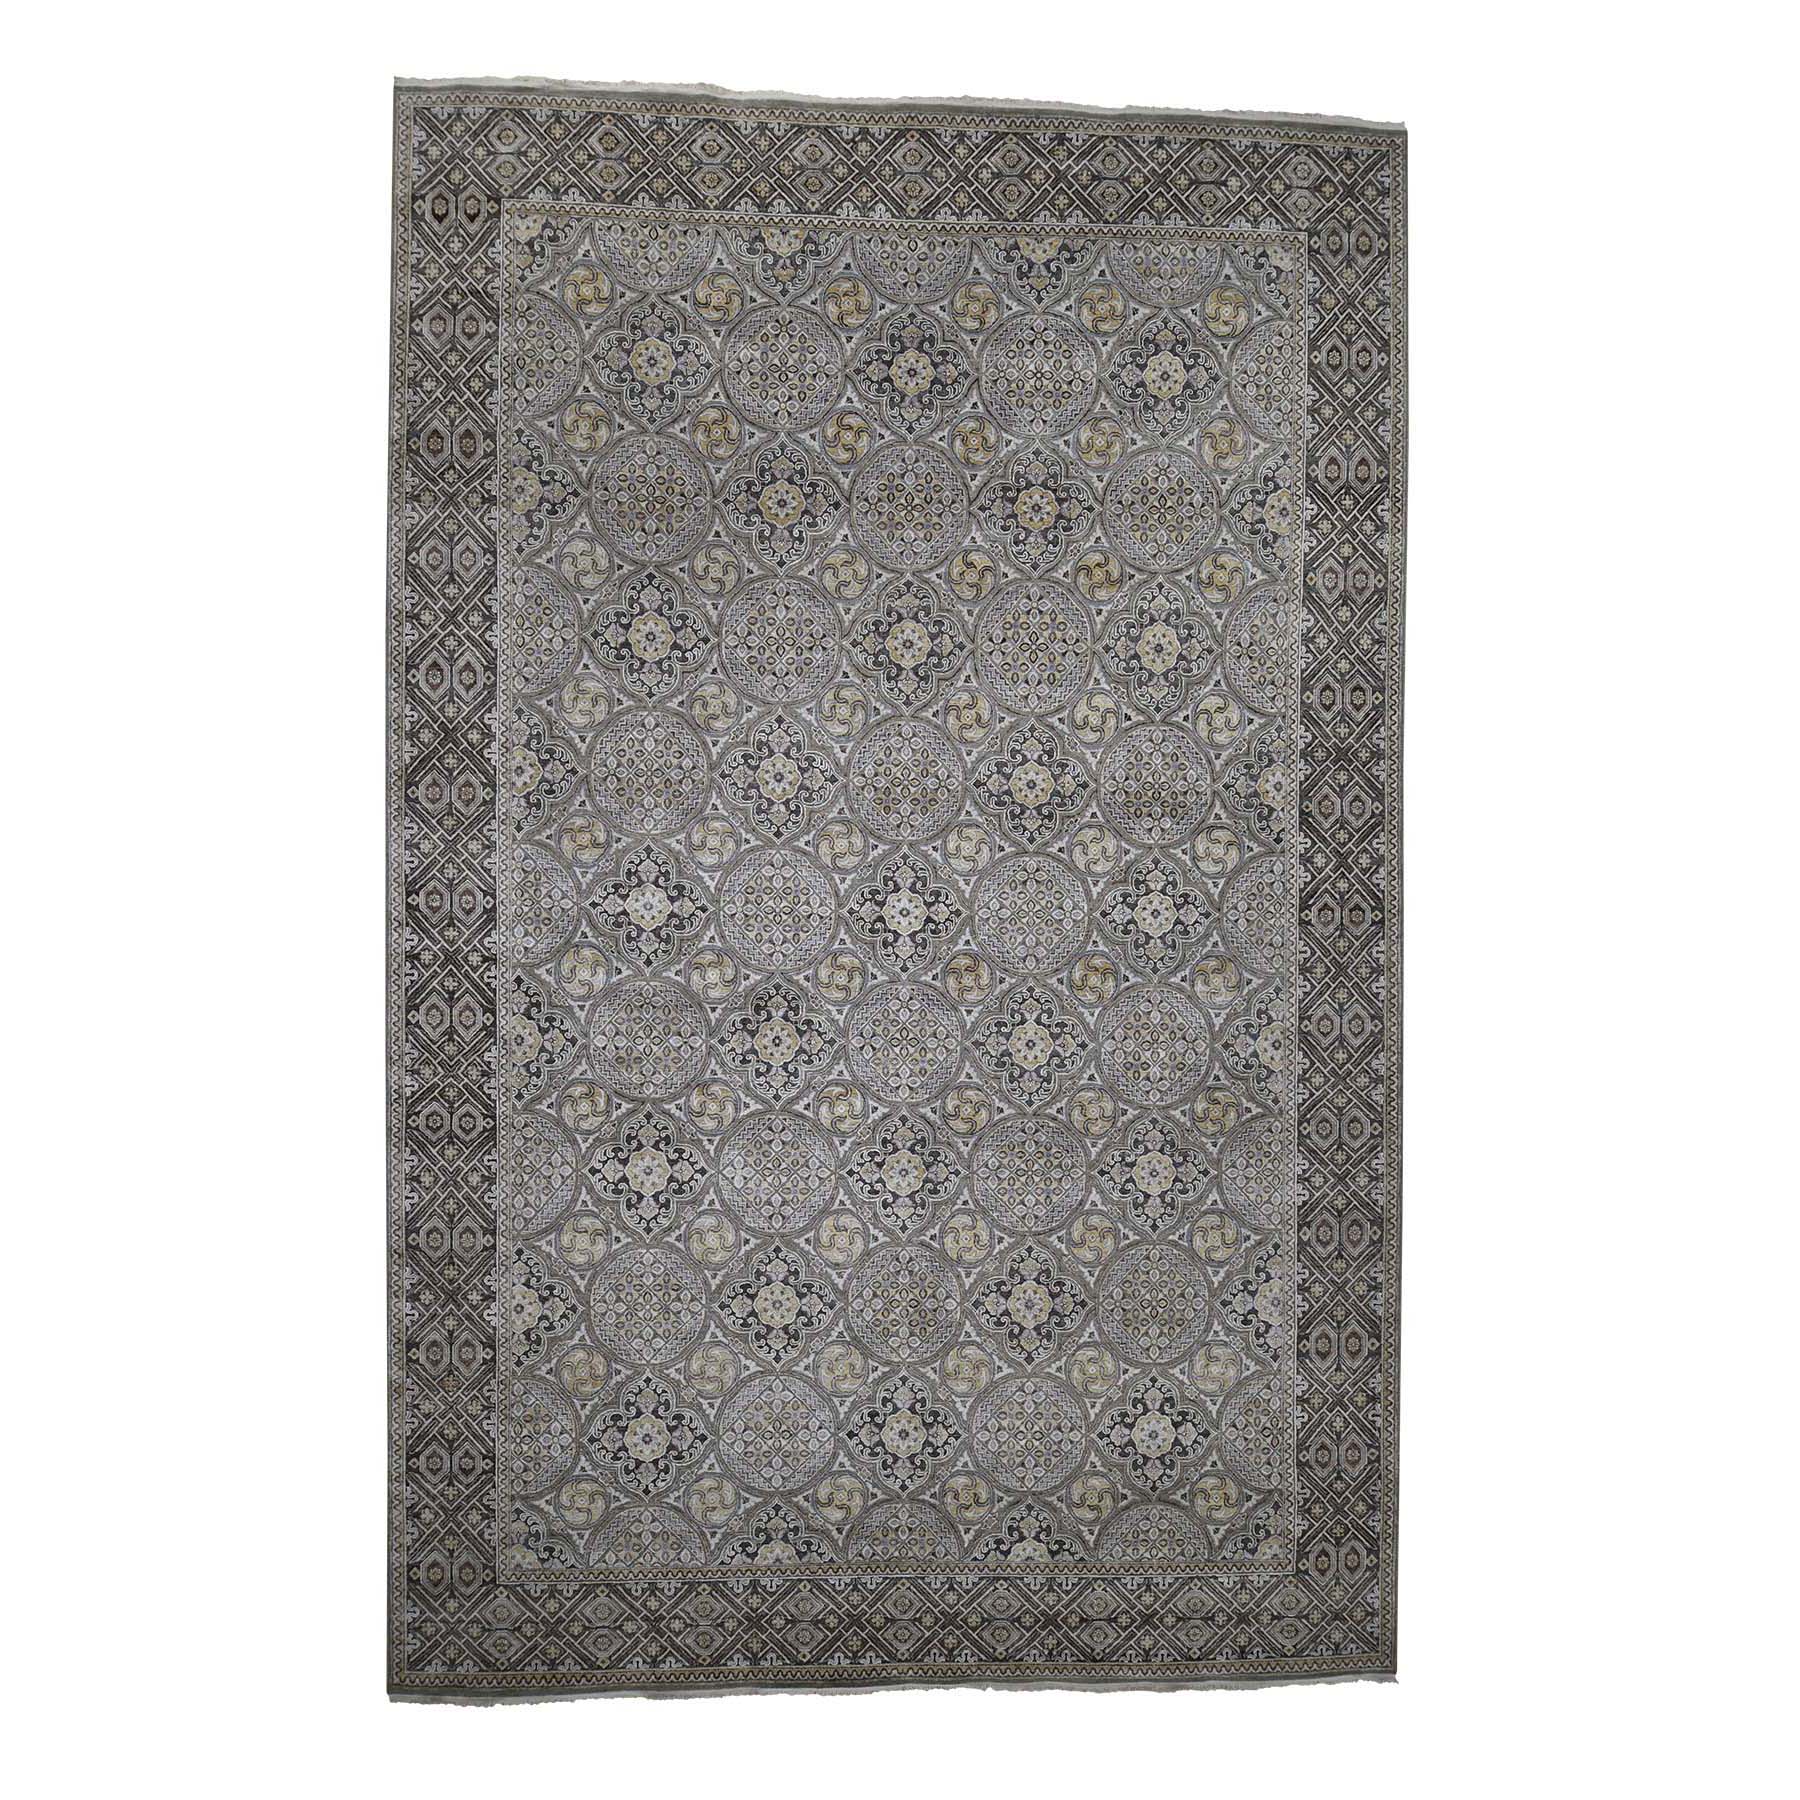 12-x18-6  Mughal Inspired Medallions Textured Wool and Silk Oversize Hand-Knotted Oriental Rug 